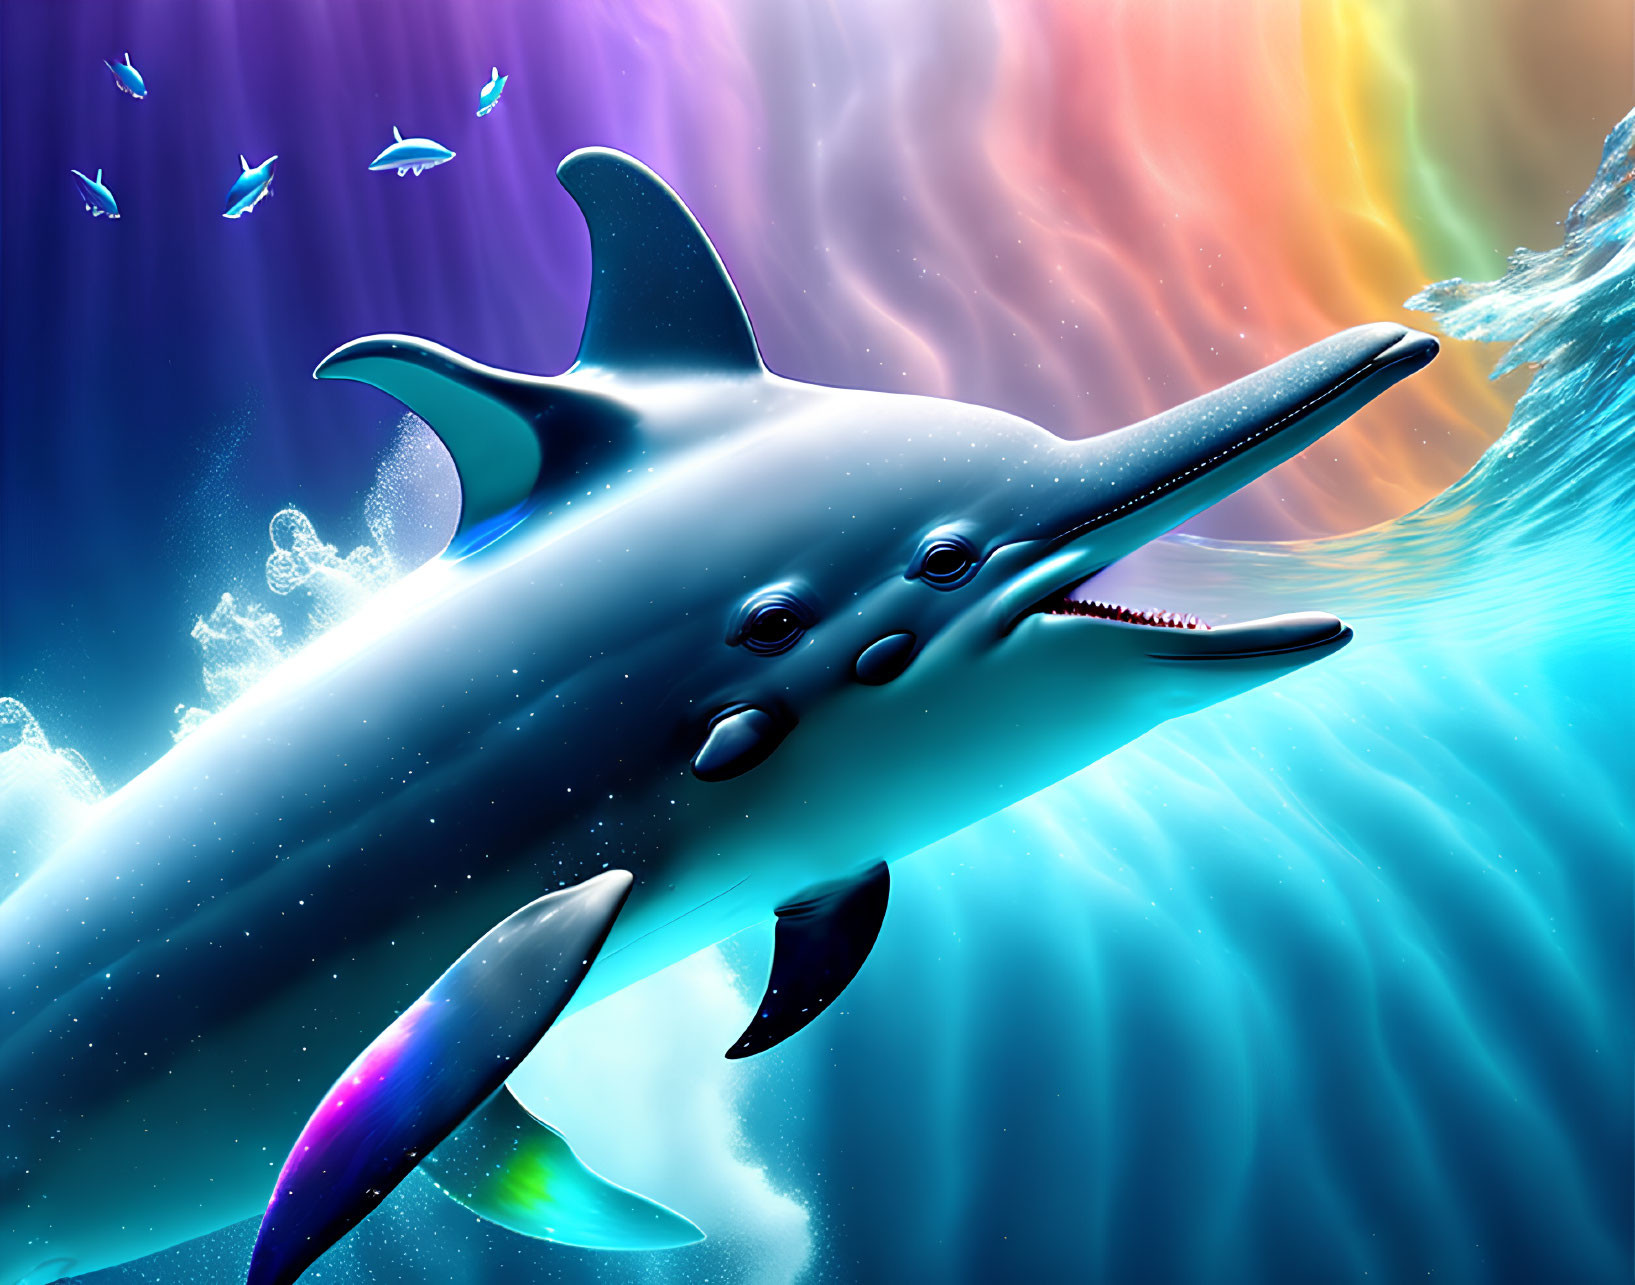 Colorful Digital Art: Smiling Dolphin Leaping from Ocean